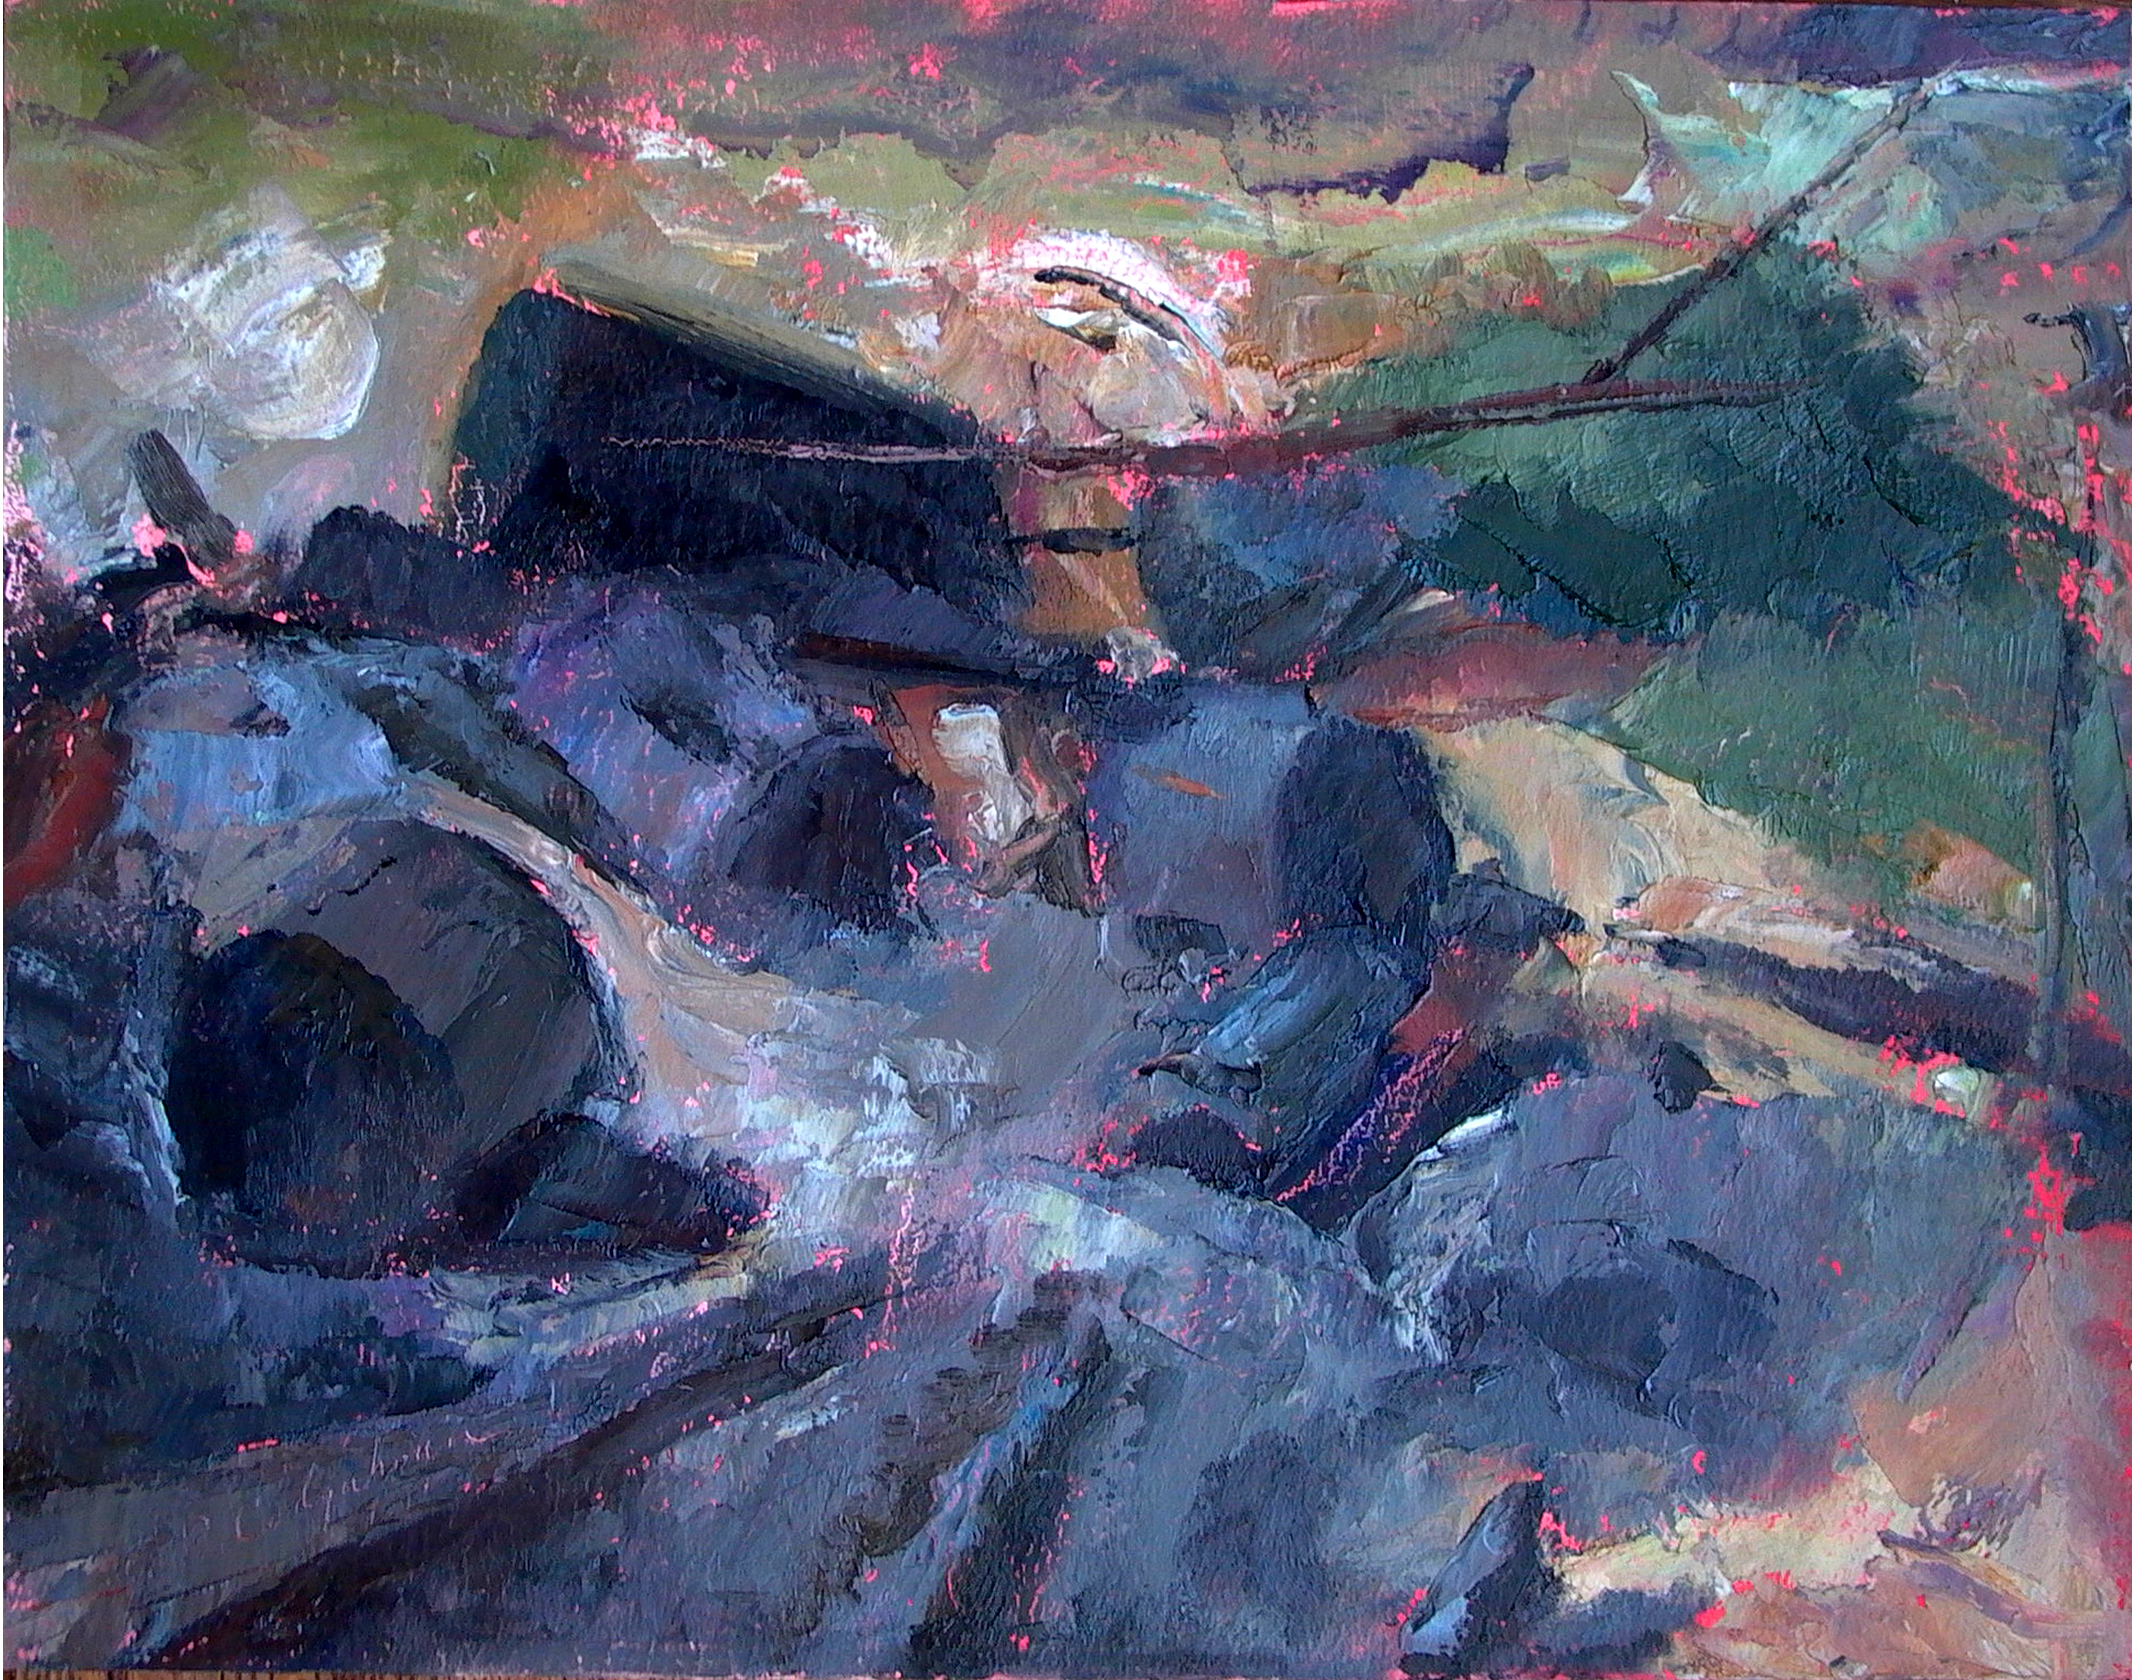 Charred Logs, 12" x 16", oil on panel, 2000. Collection of the artist.